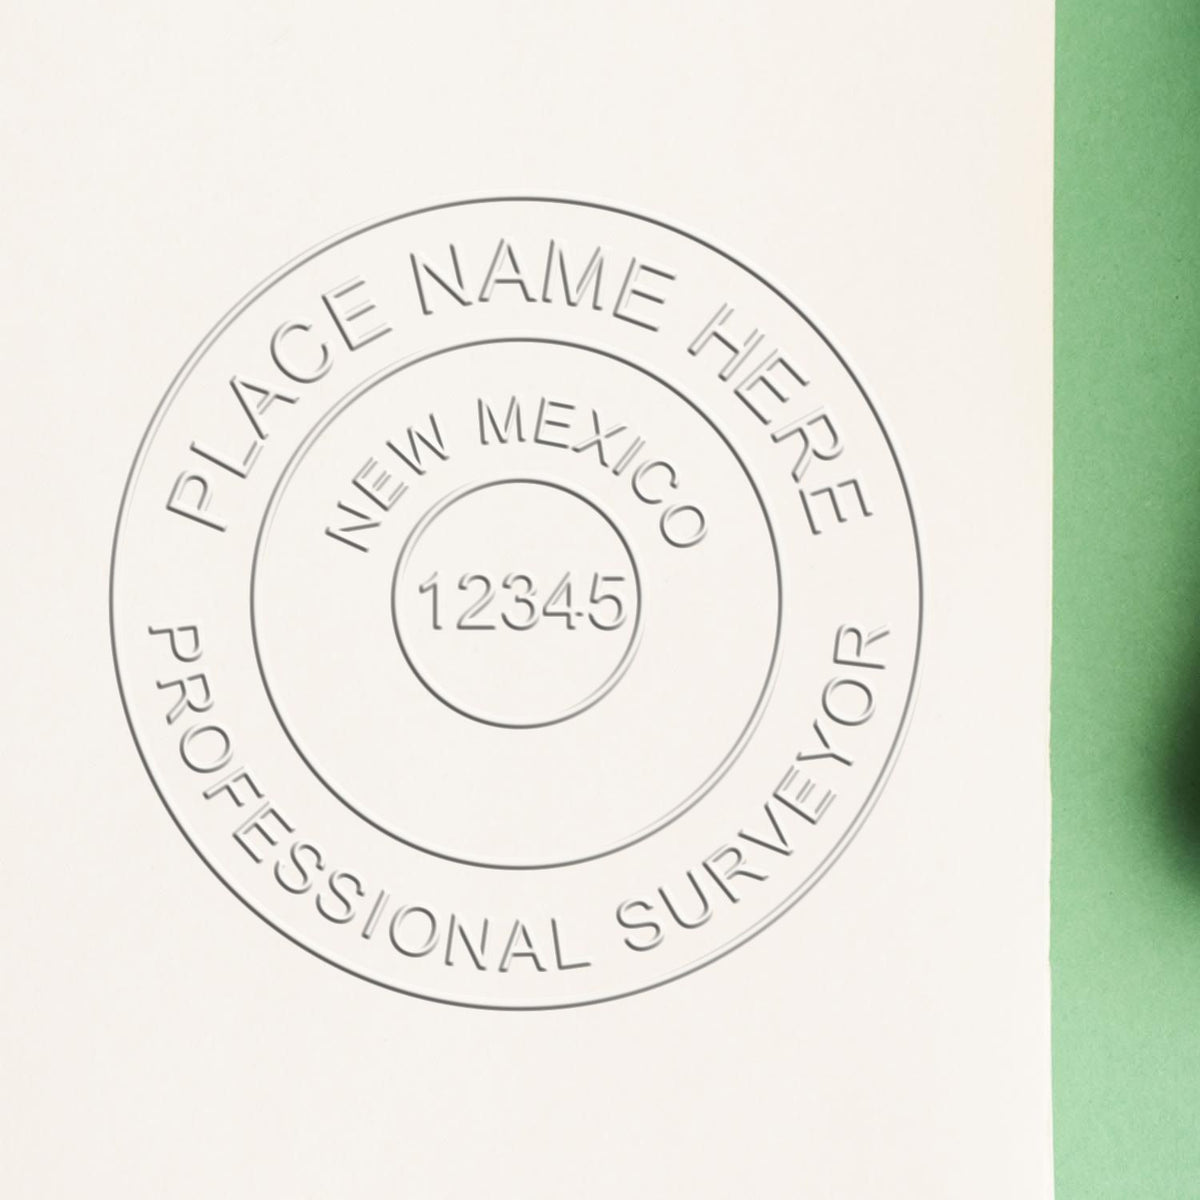 A stamped imprint of the Gift New Mexico Land Surveyor Seal in this stylish lifestyle photo, setting the tone for a unique and personalized product.